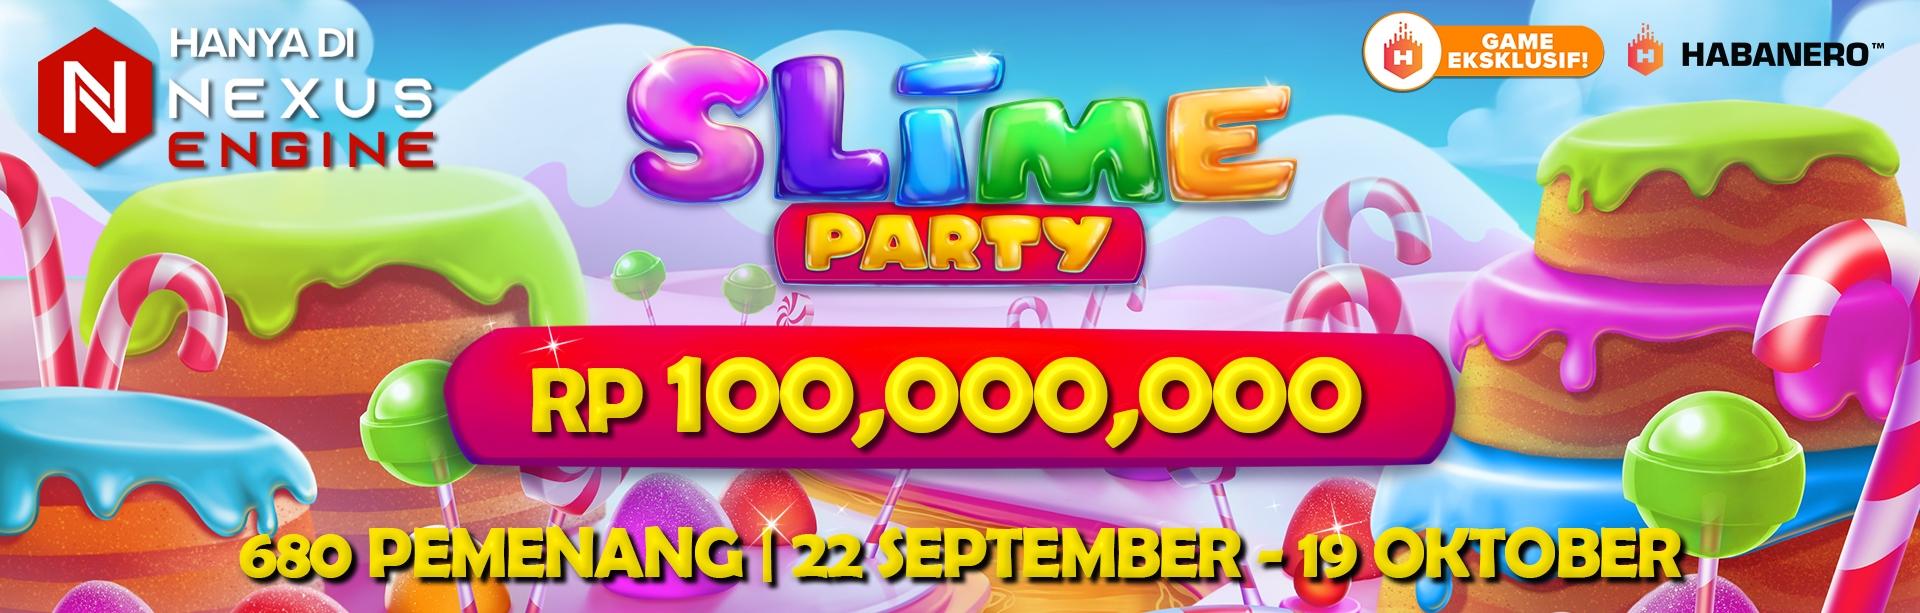 HABANERO SLIME PARTY EVENT